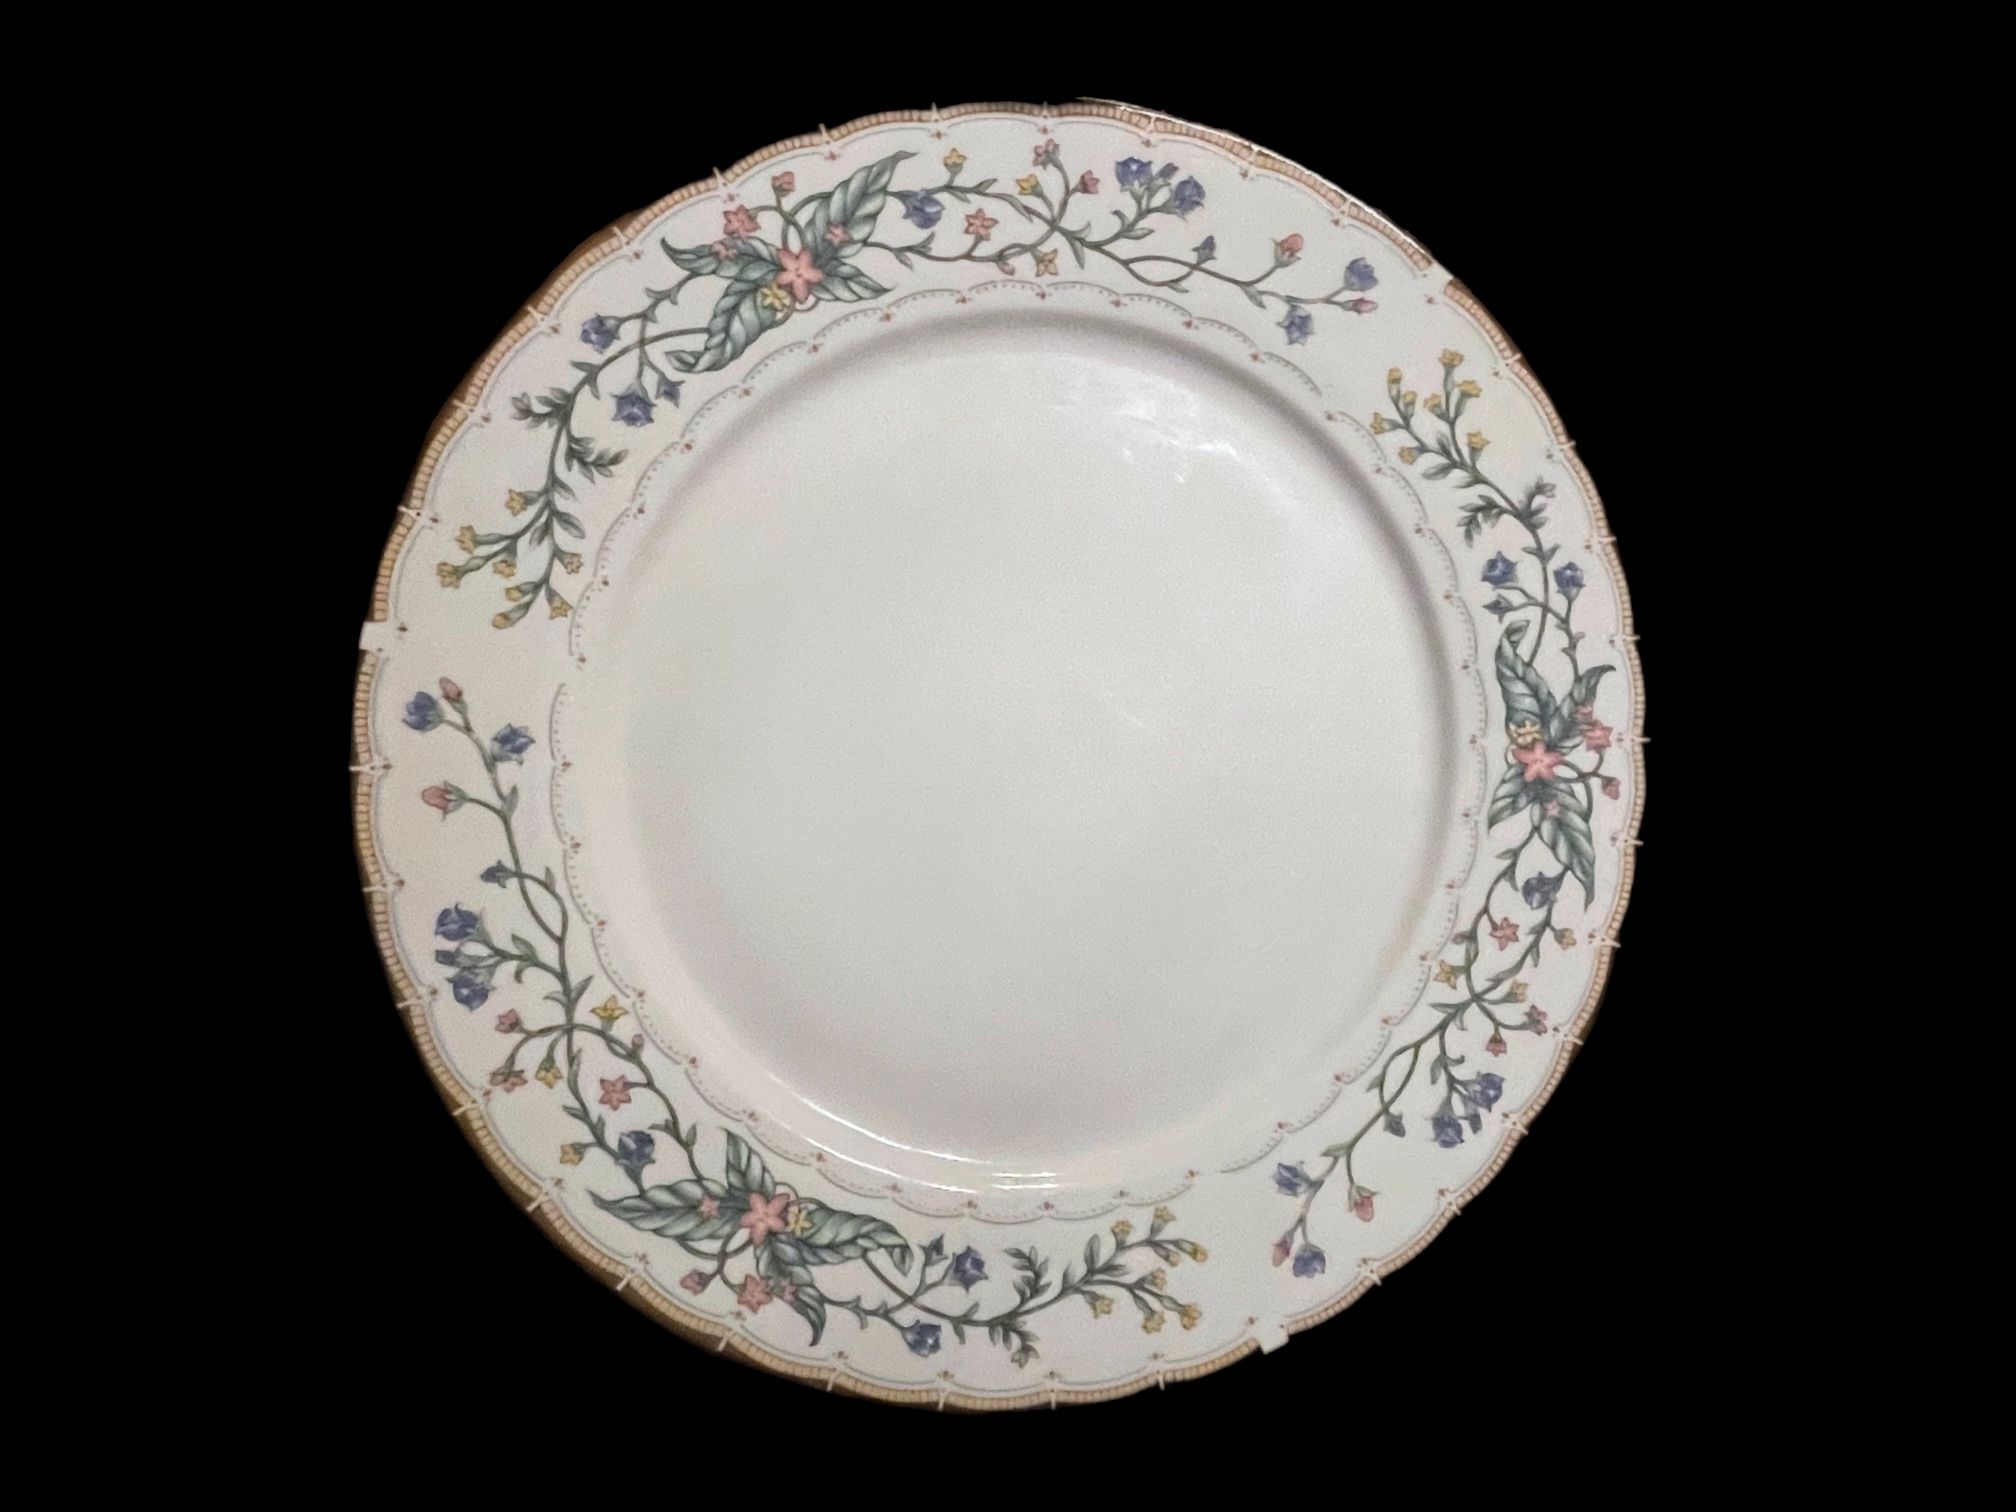 Vintage Farberware Wellesley Fine China Dinner Plate 10.75” (8 available)